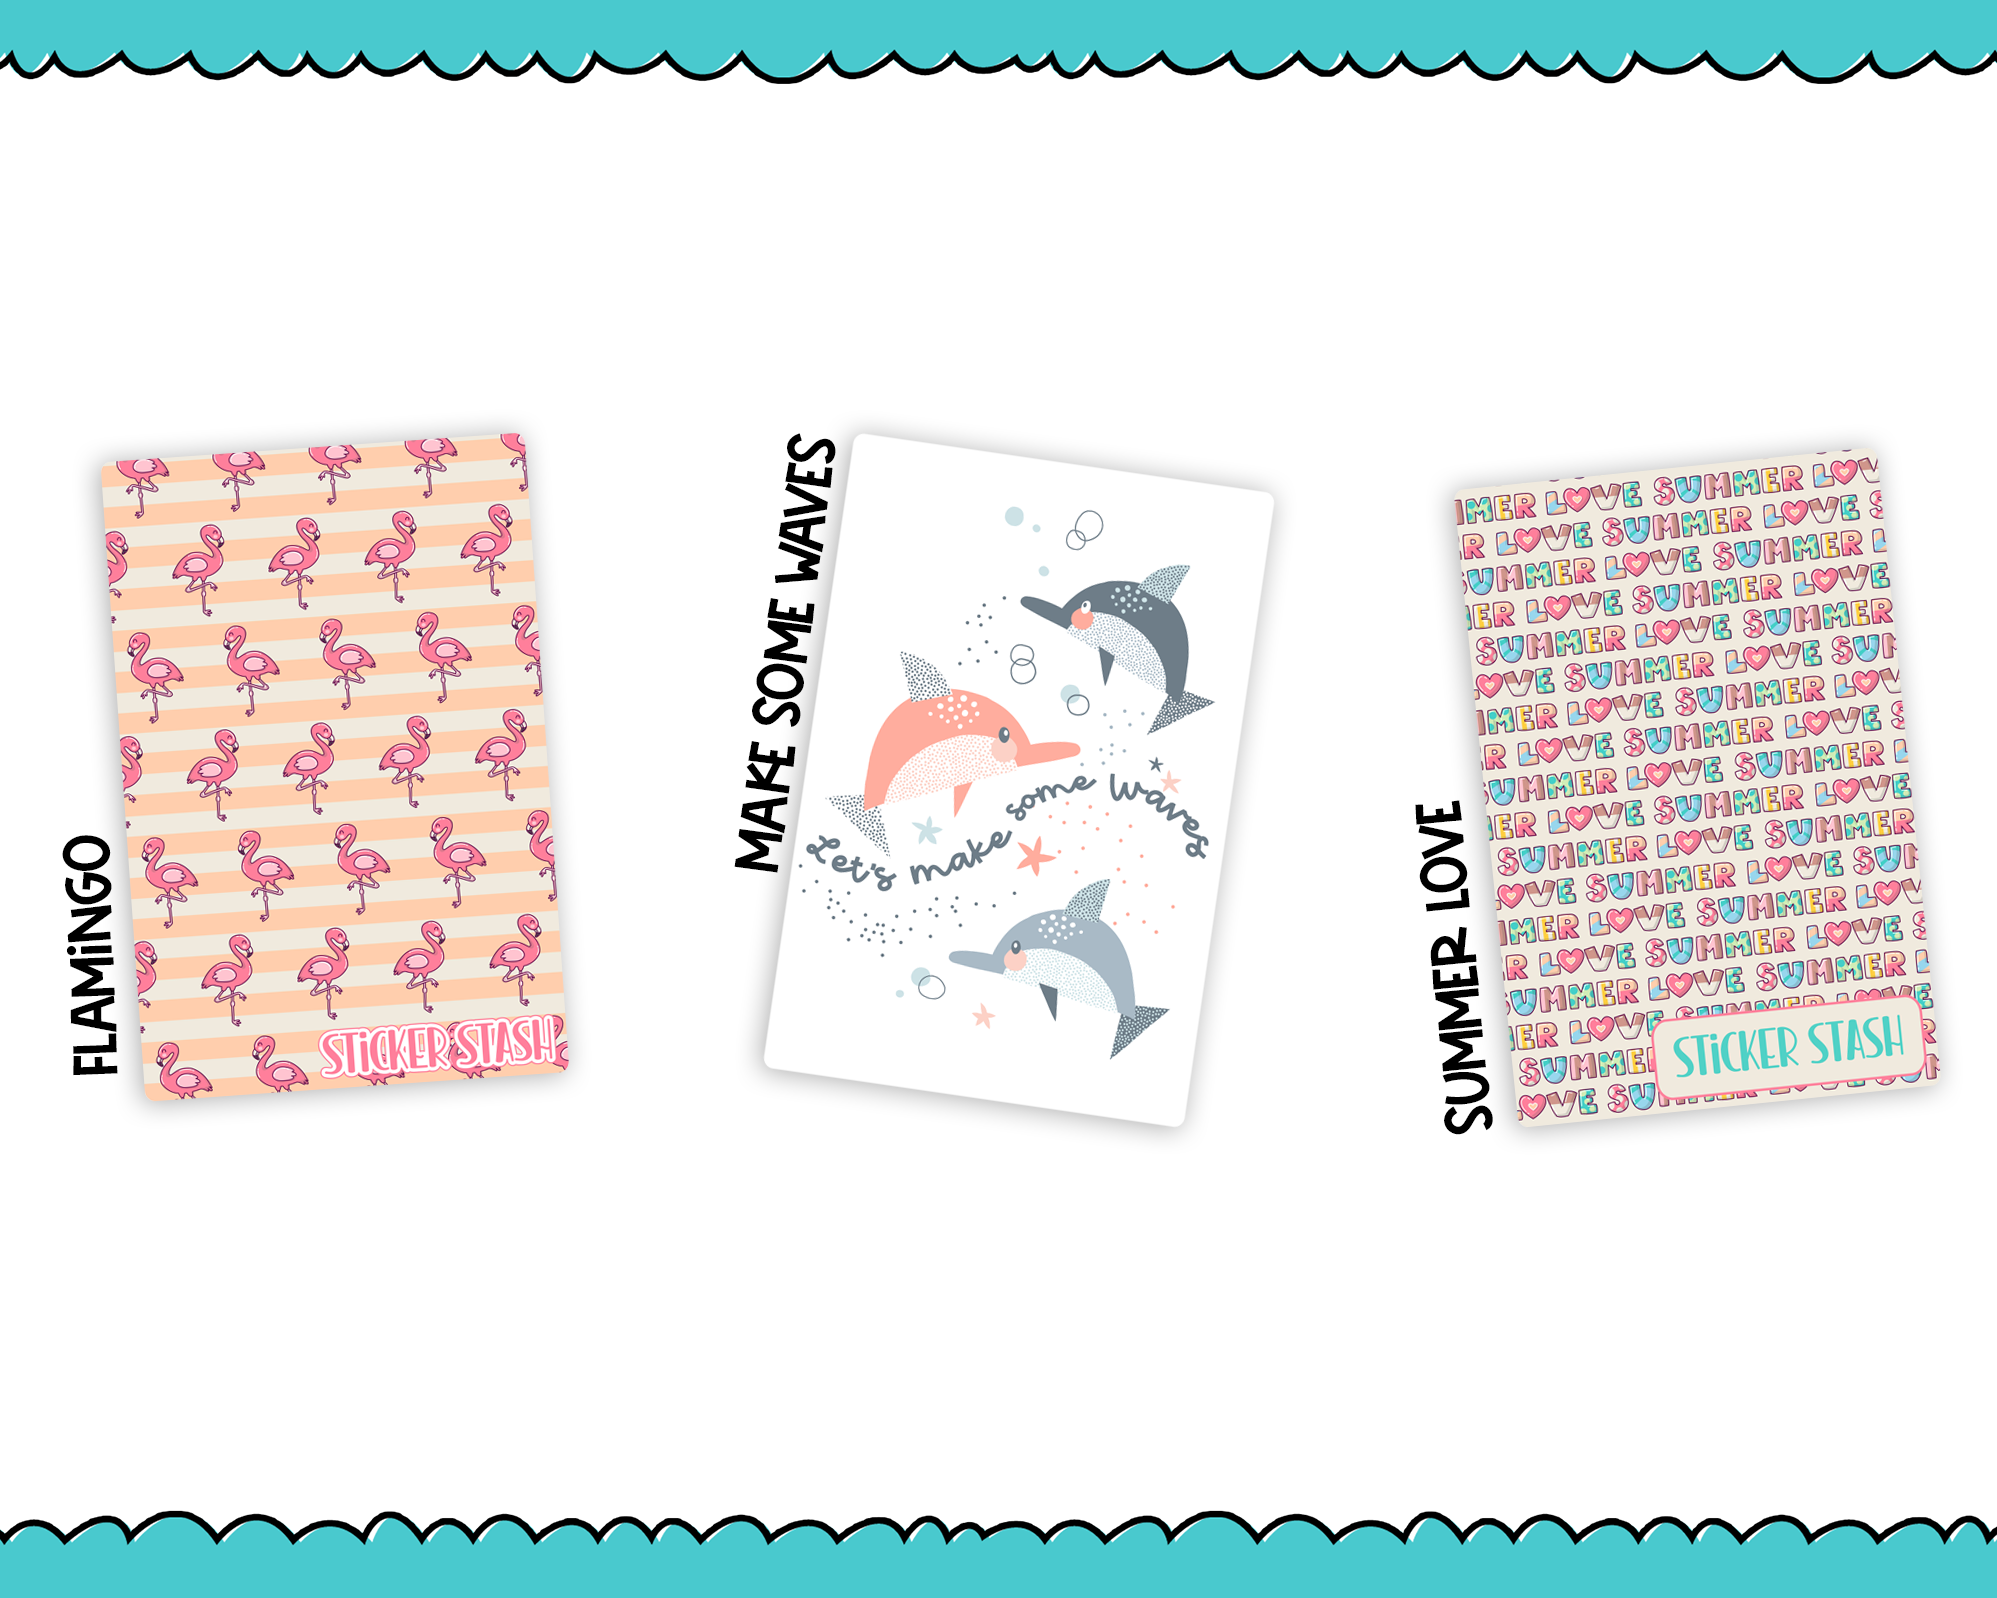 Sticker Albums - Mini Size, 4x6 Size and 5x7 Size - 60 sleeves